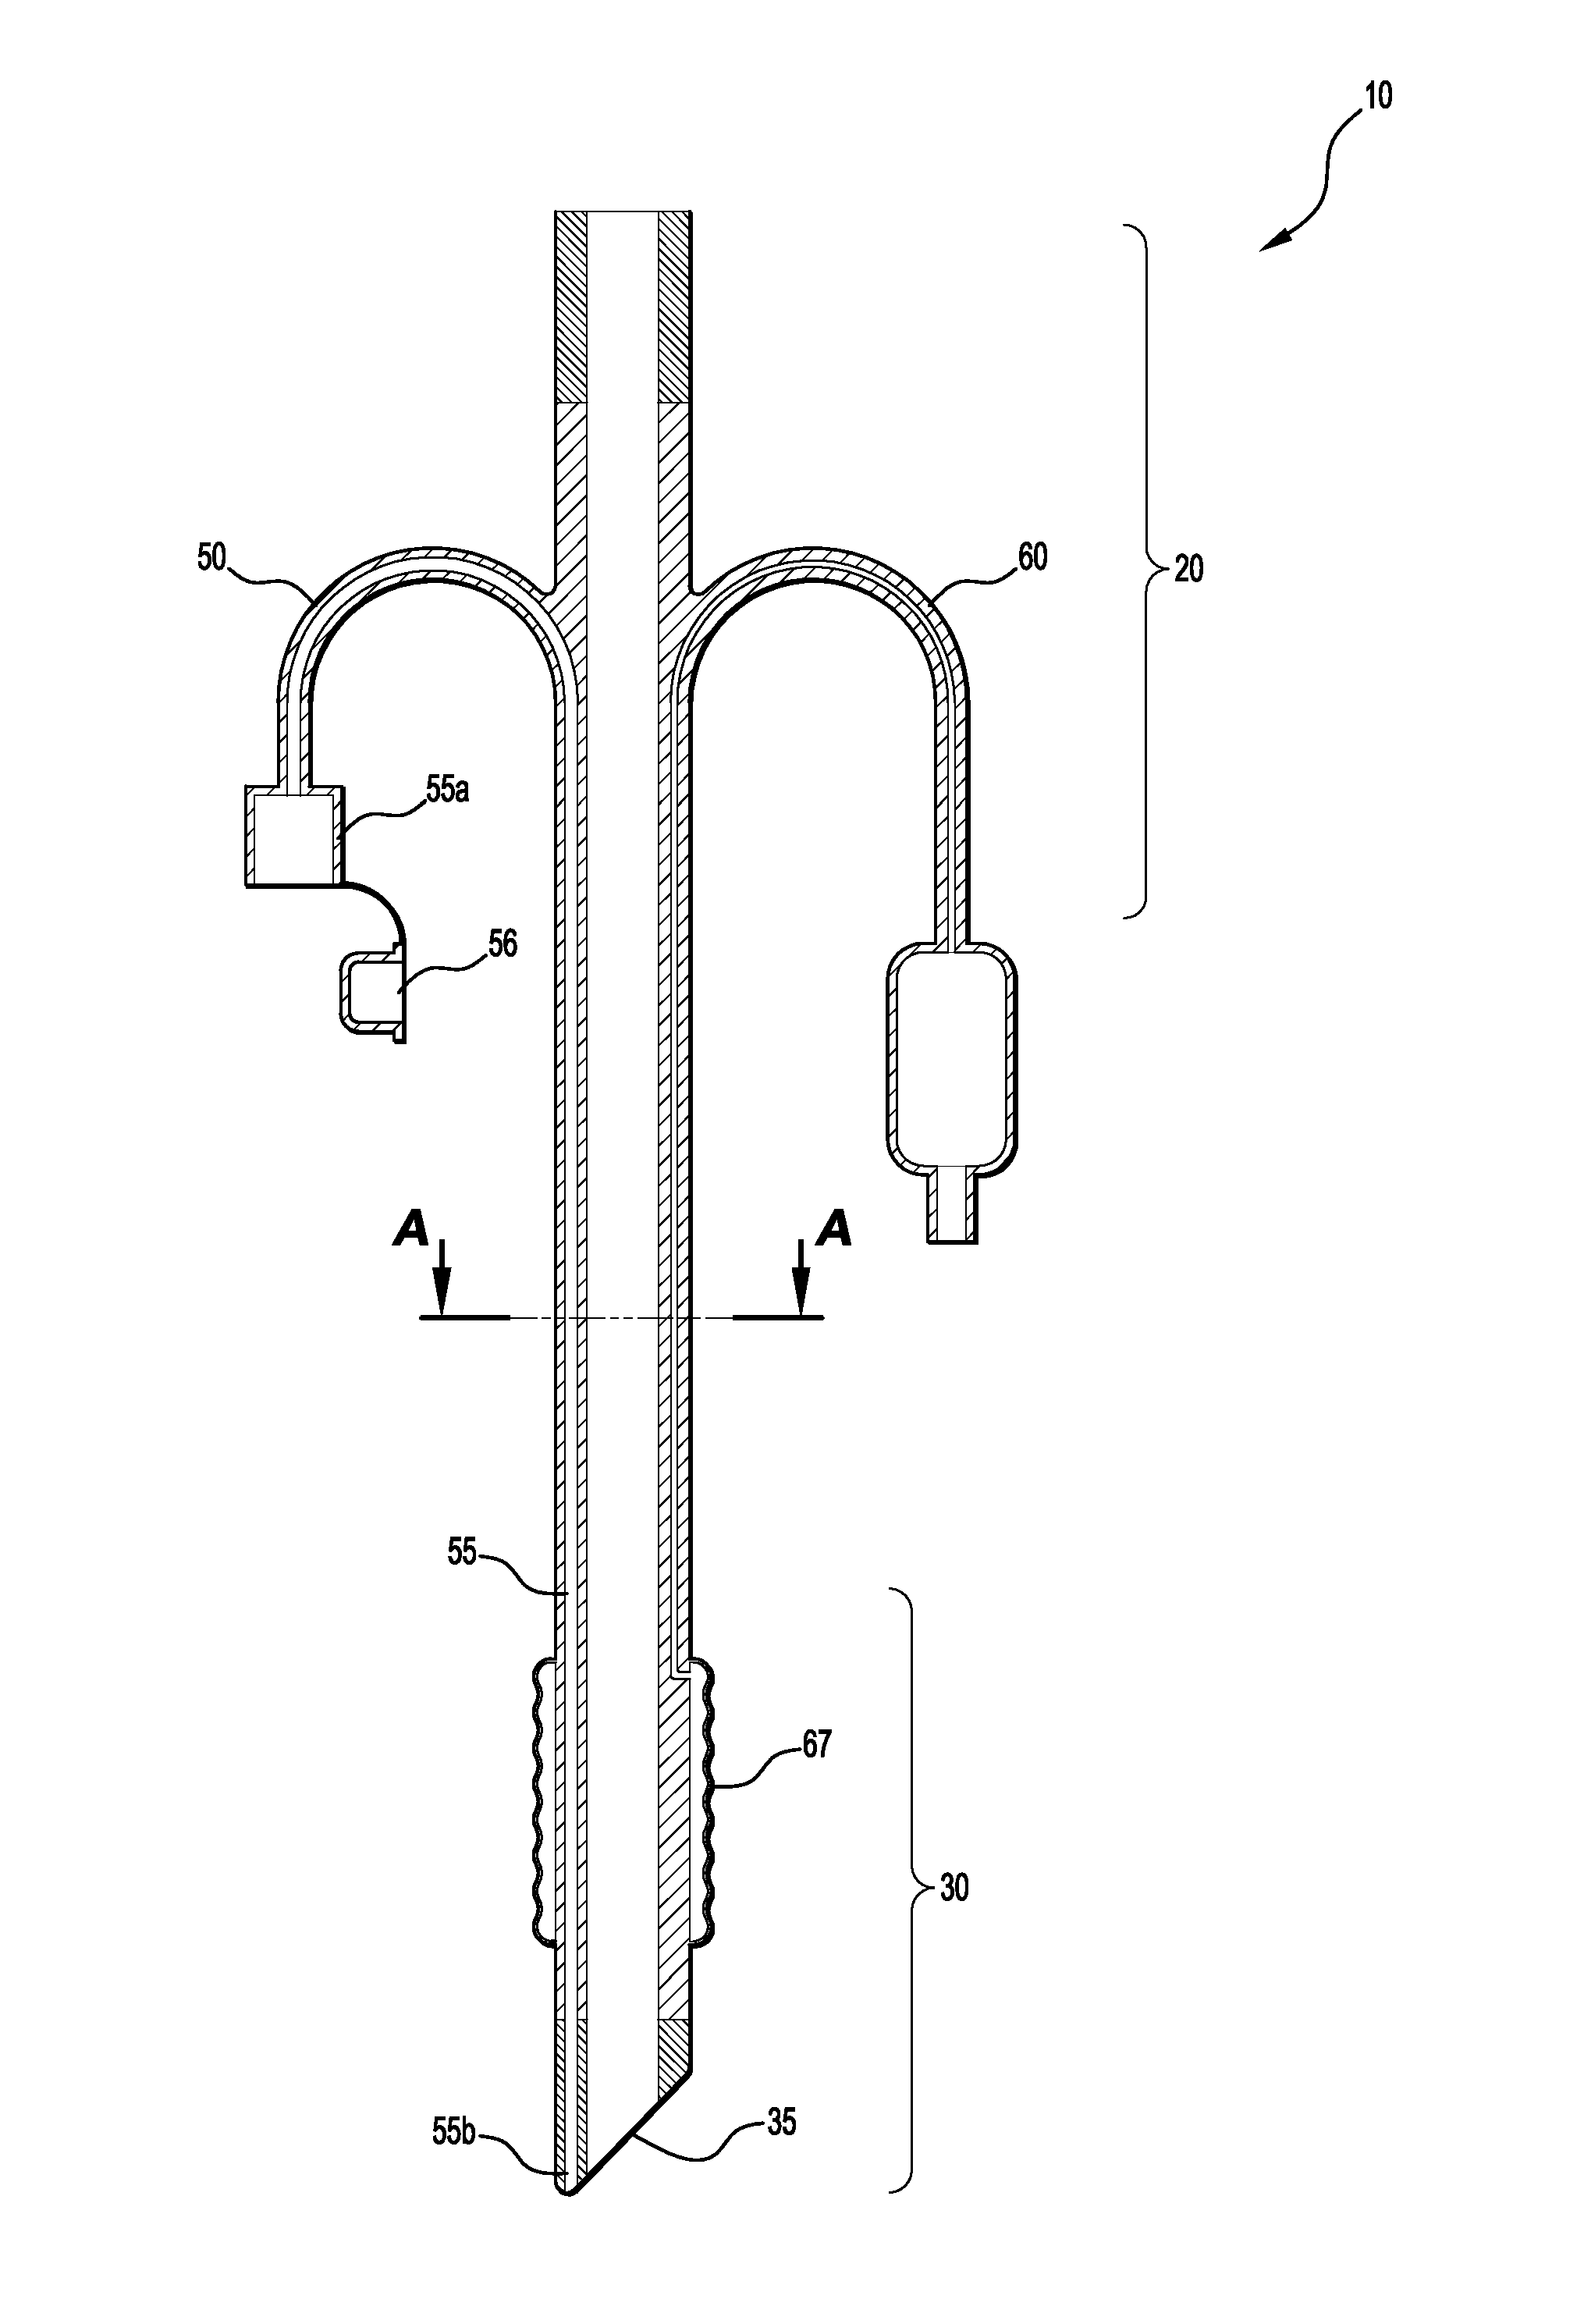 Endotracheal tube and method of use